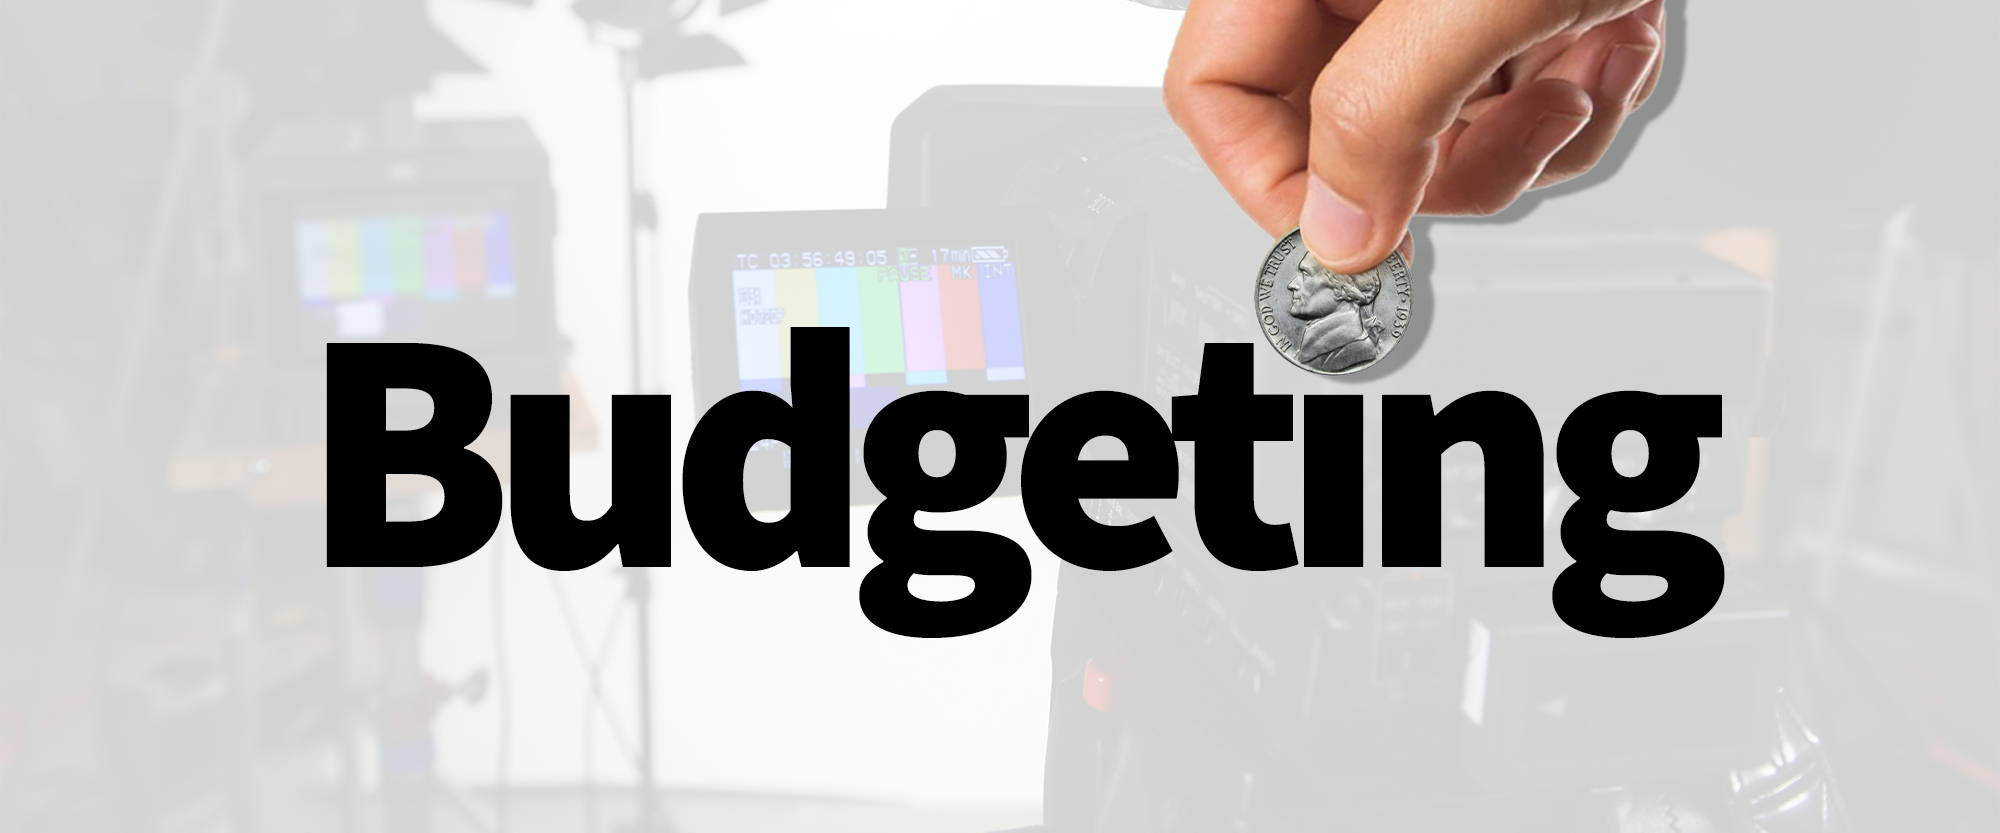 End of the Year Blues? See Our Content Solutions for Your Budgeting Headaches